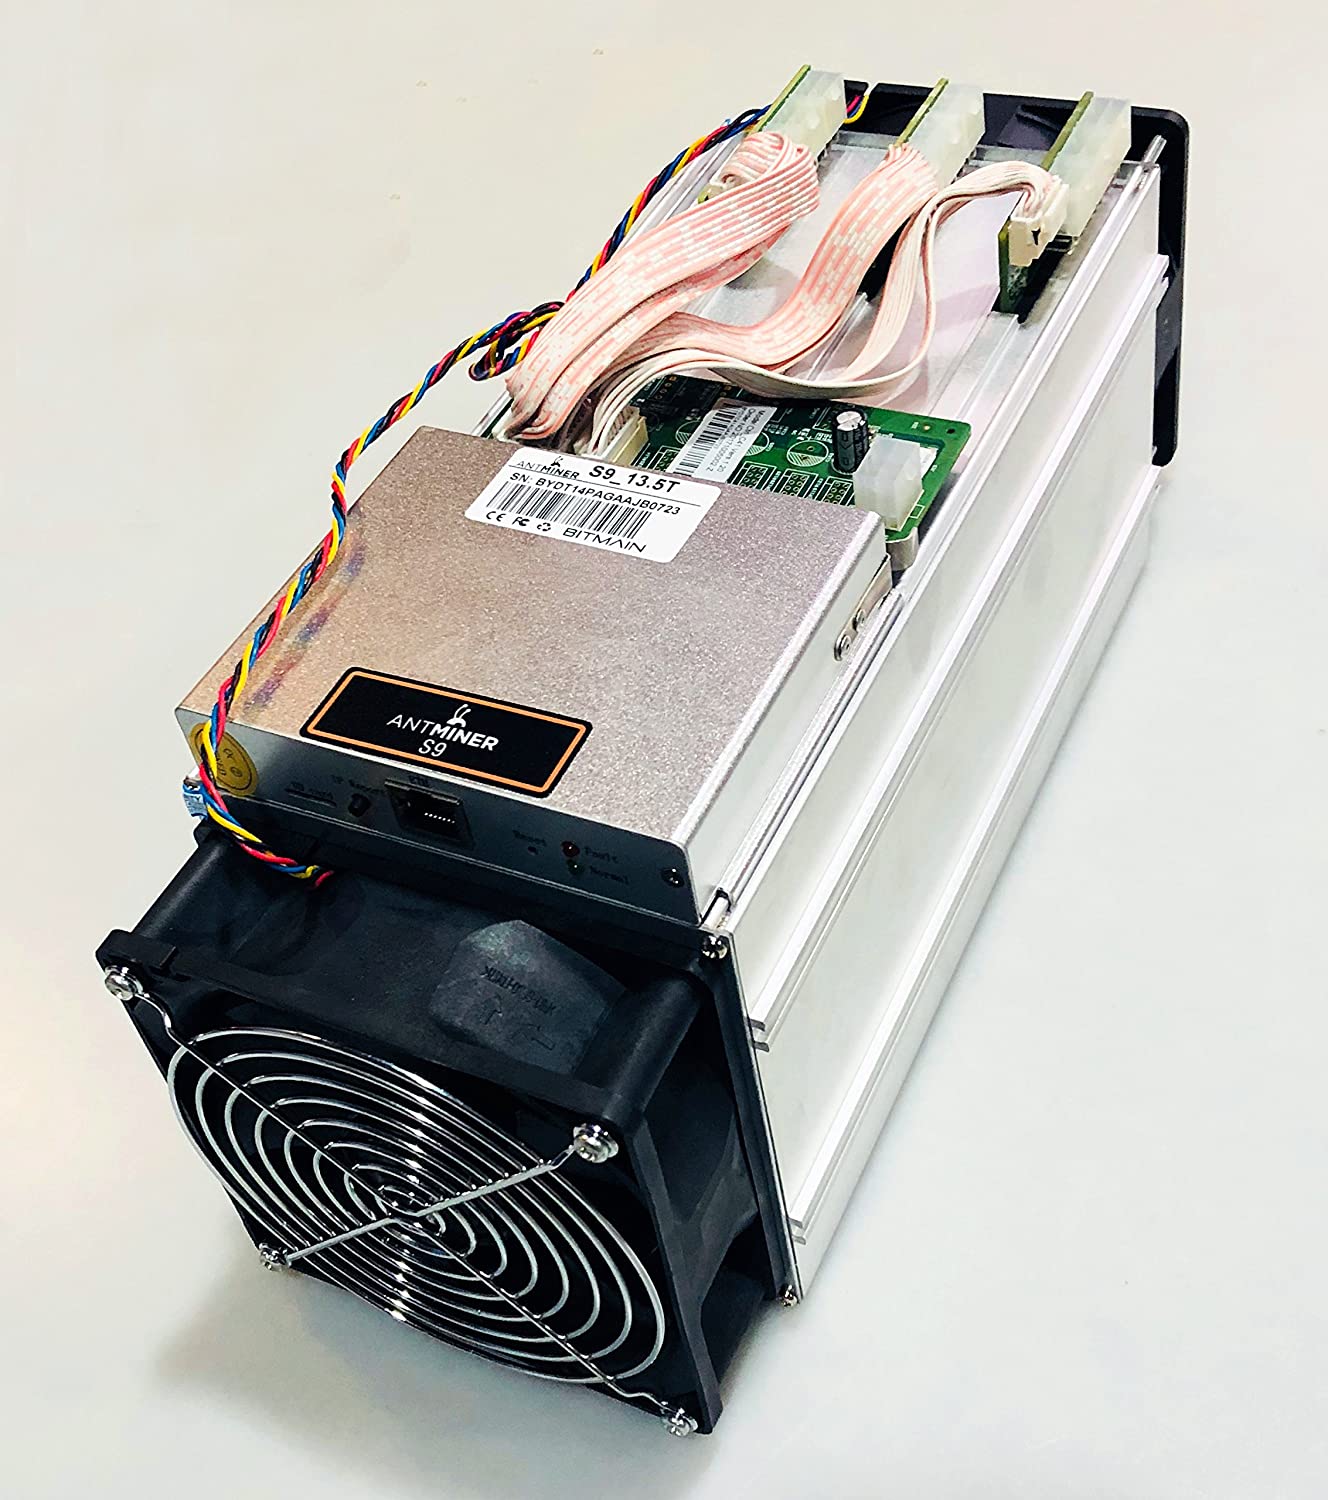 antminer s9 bitcoin per month 2018